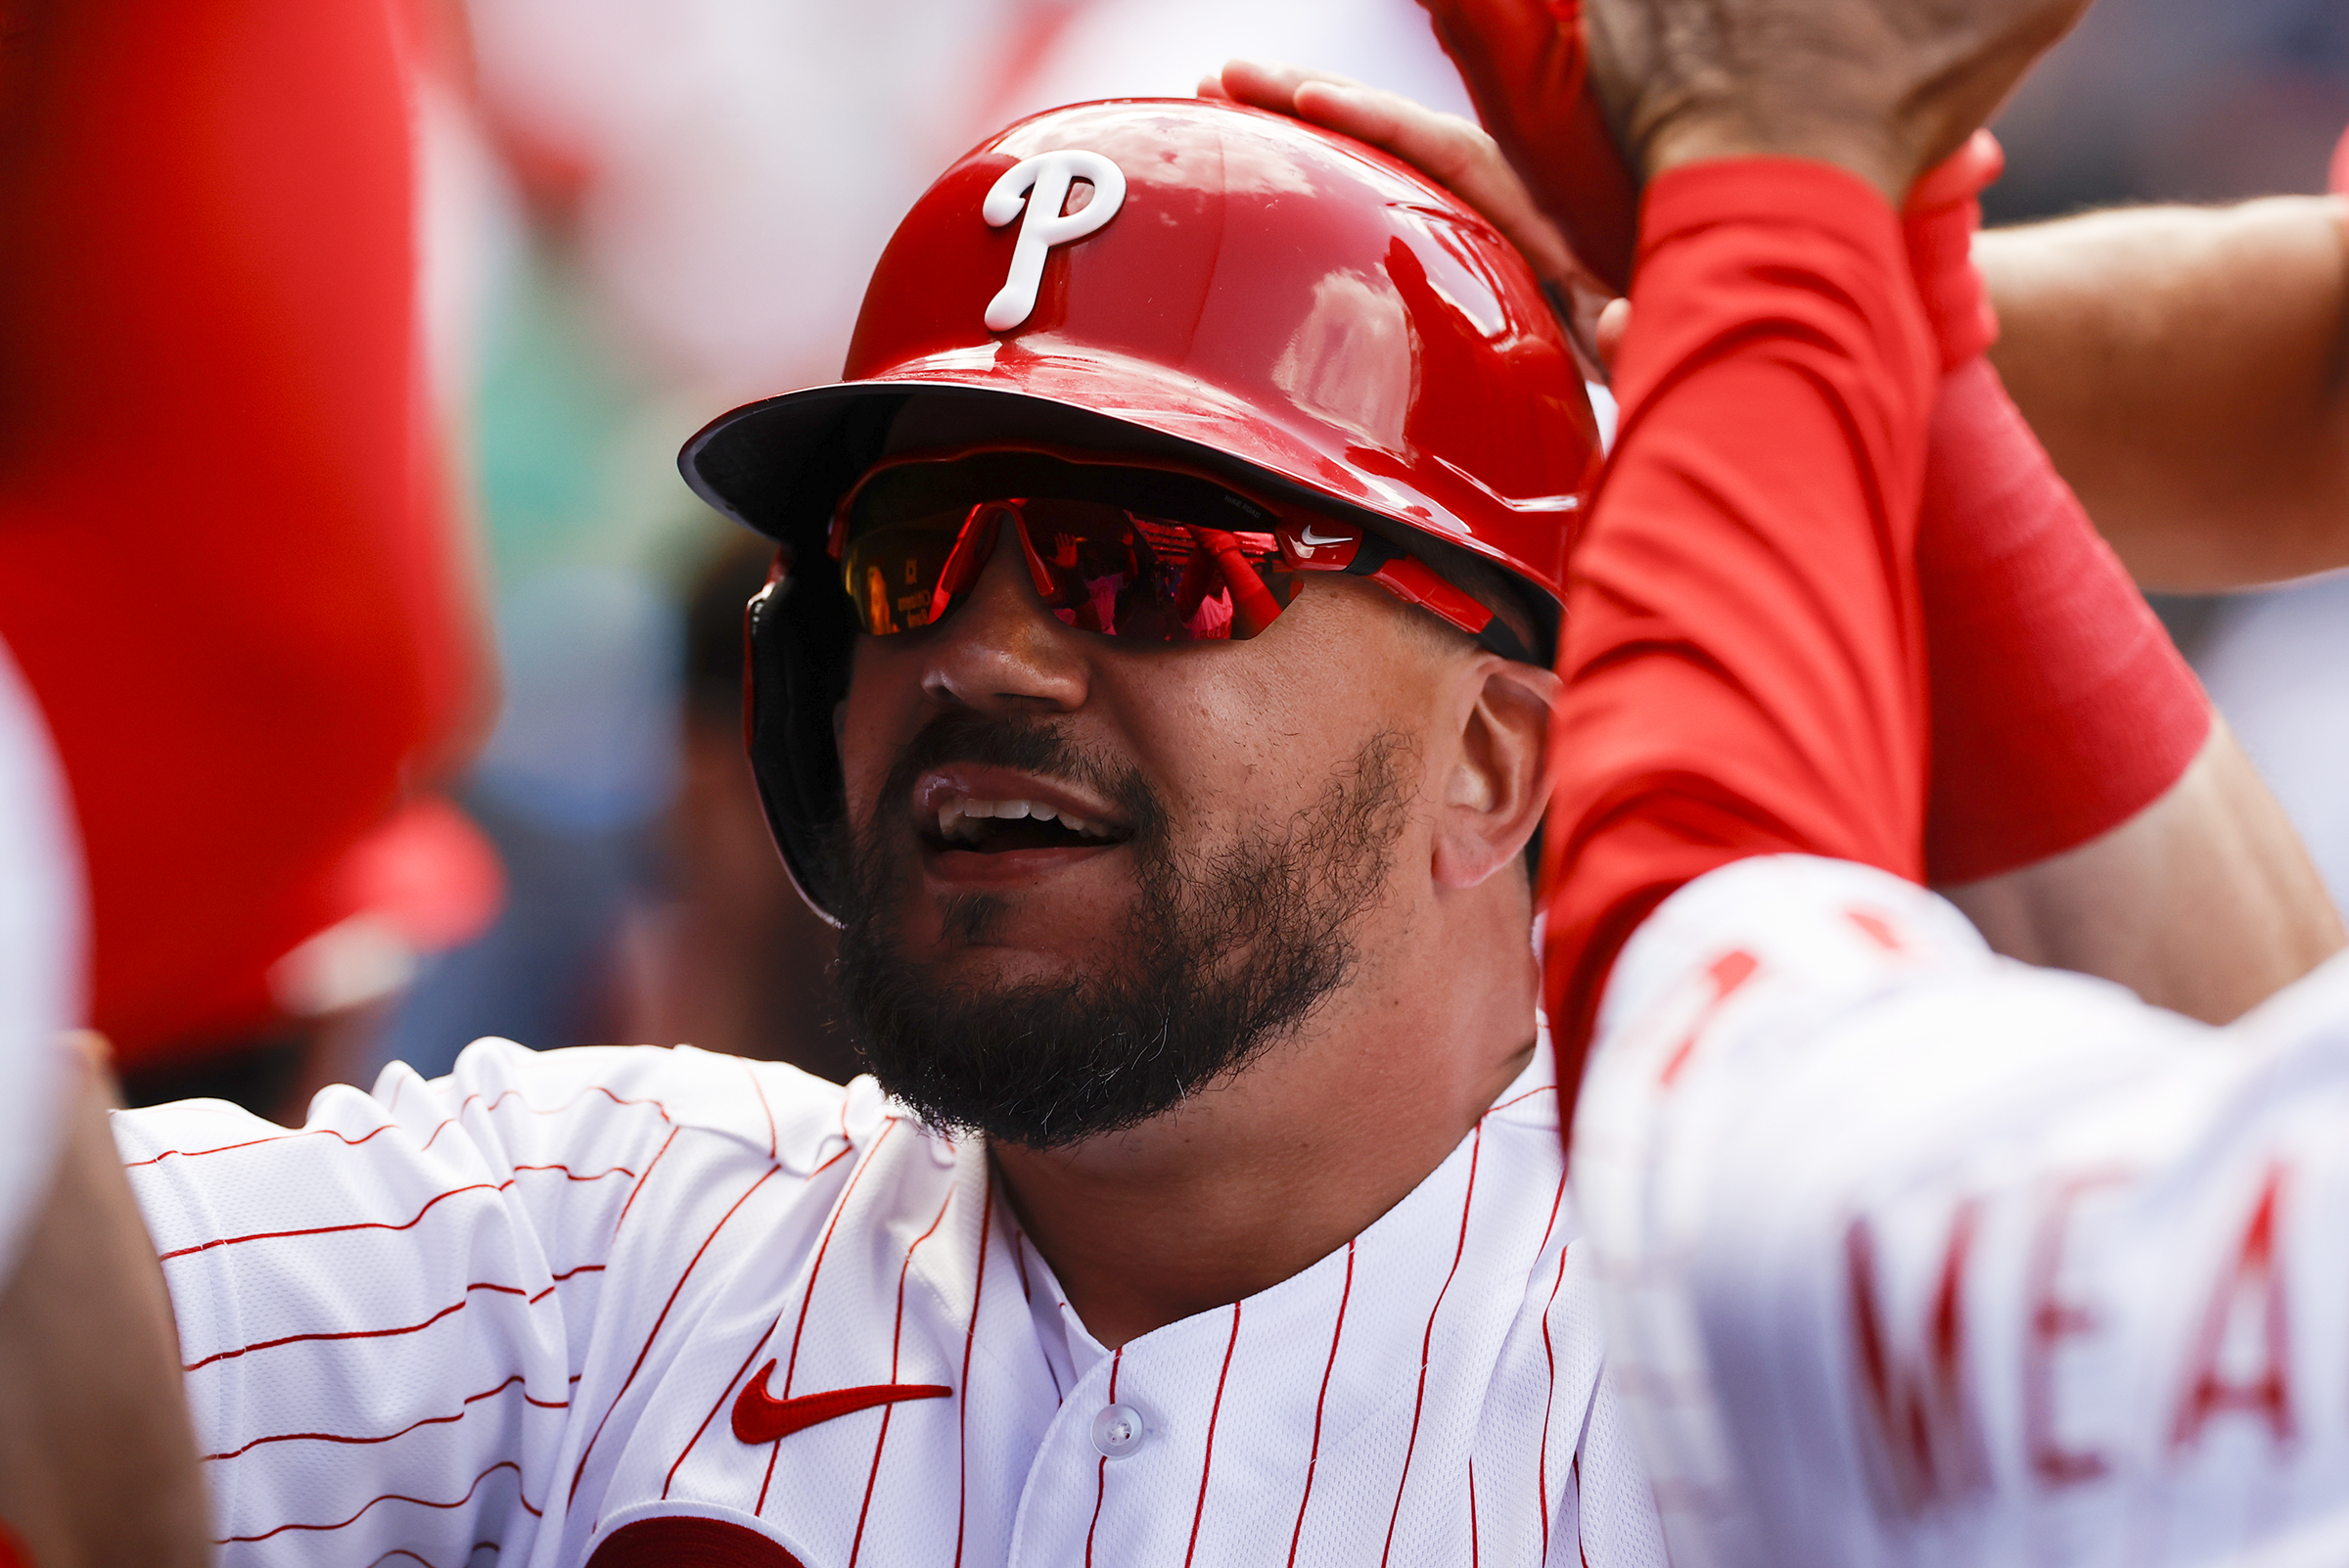 Kyle Schwarber's Phillies debut: couldn't write any better'